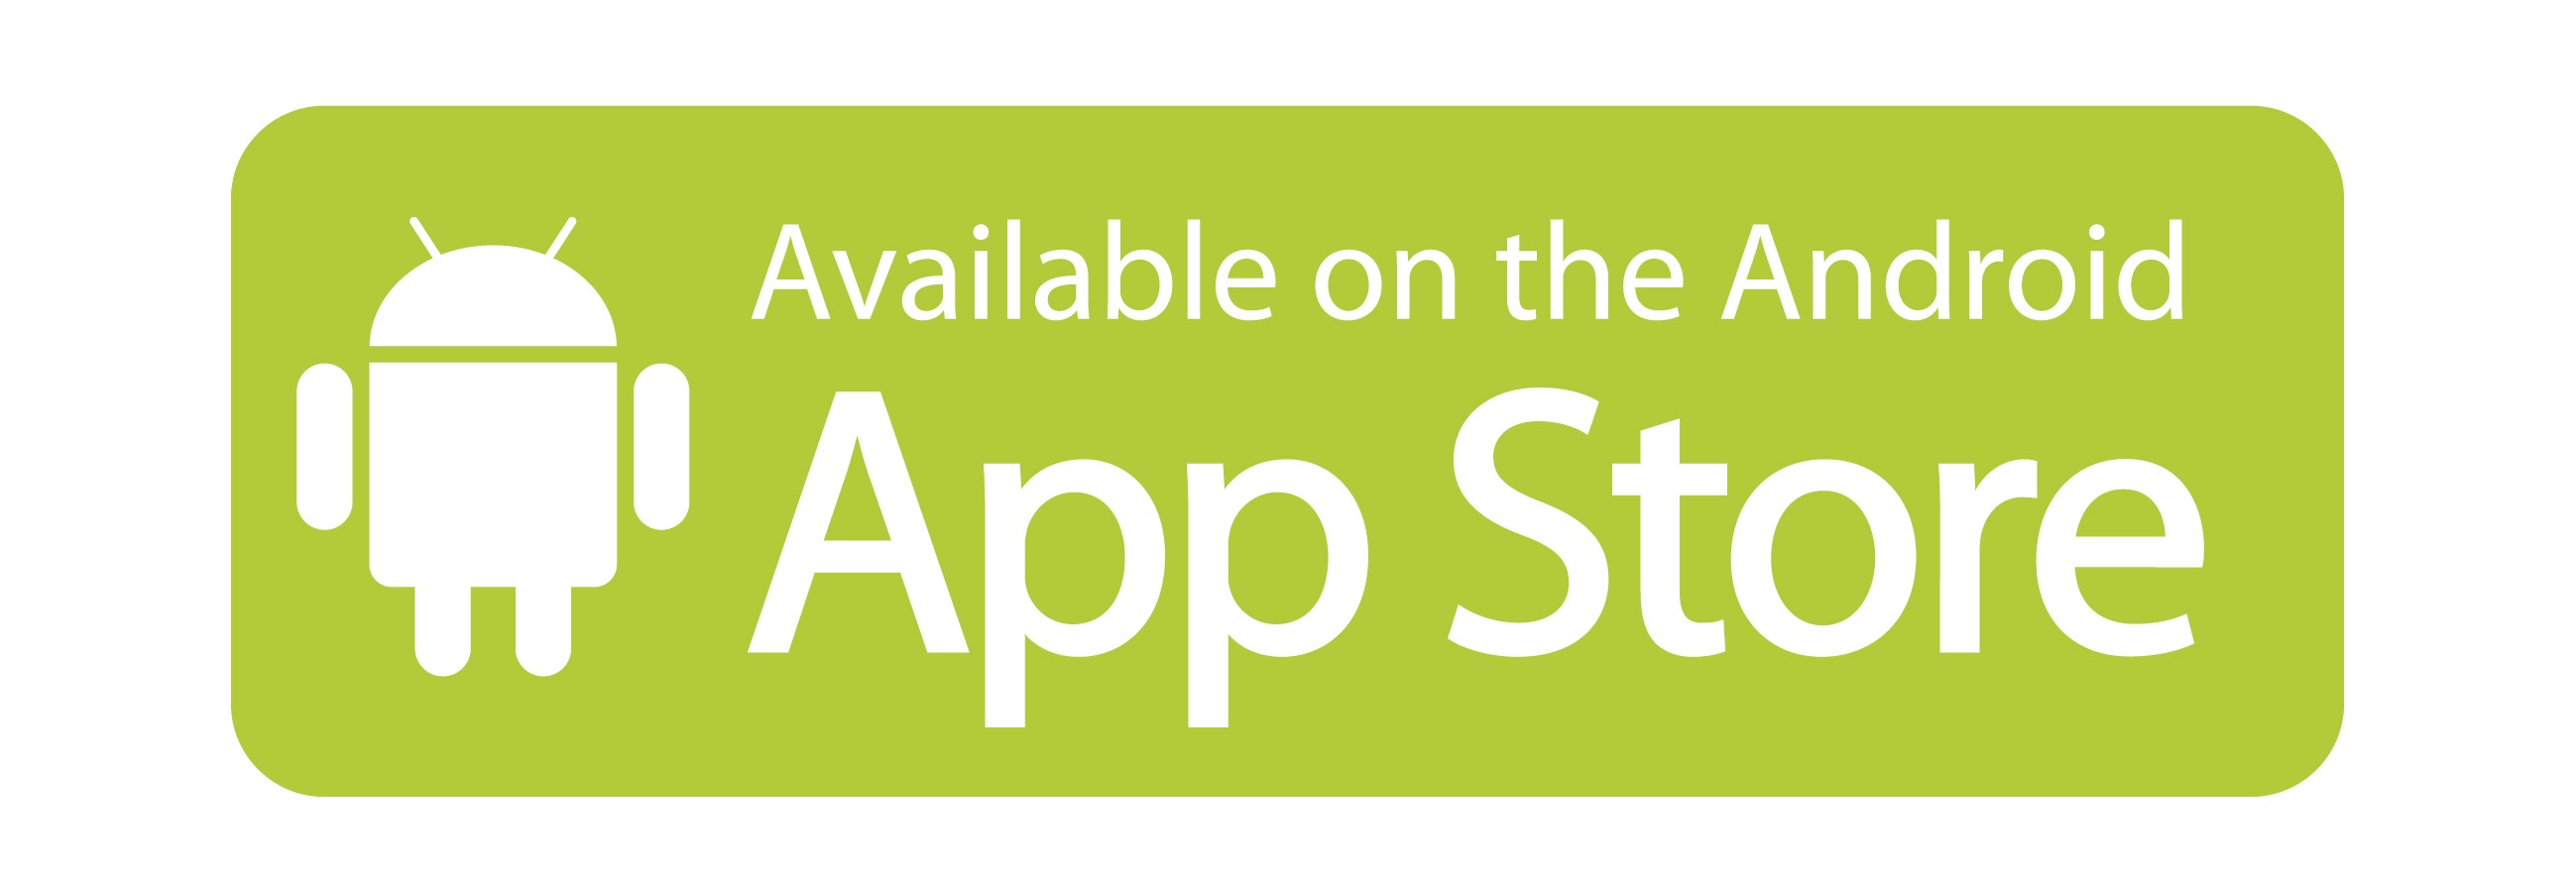 Android AppStore Logo 1